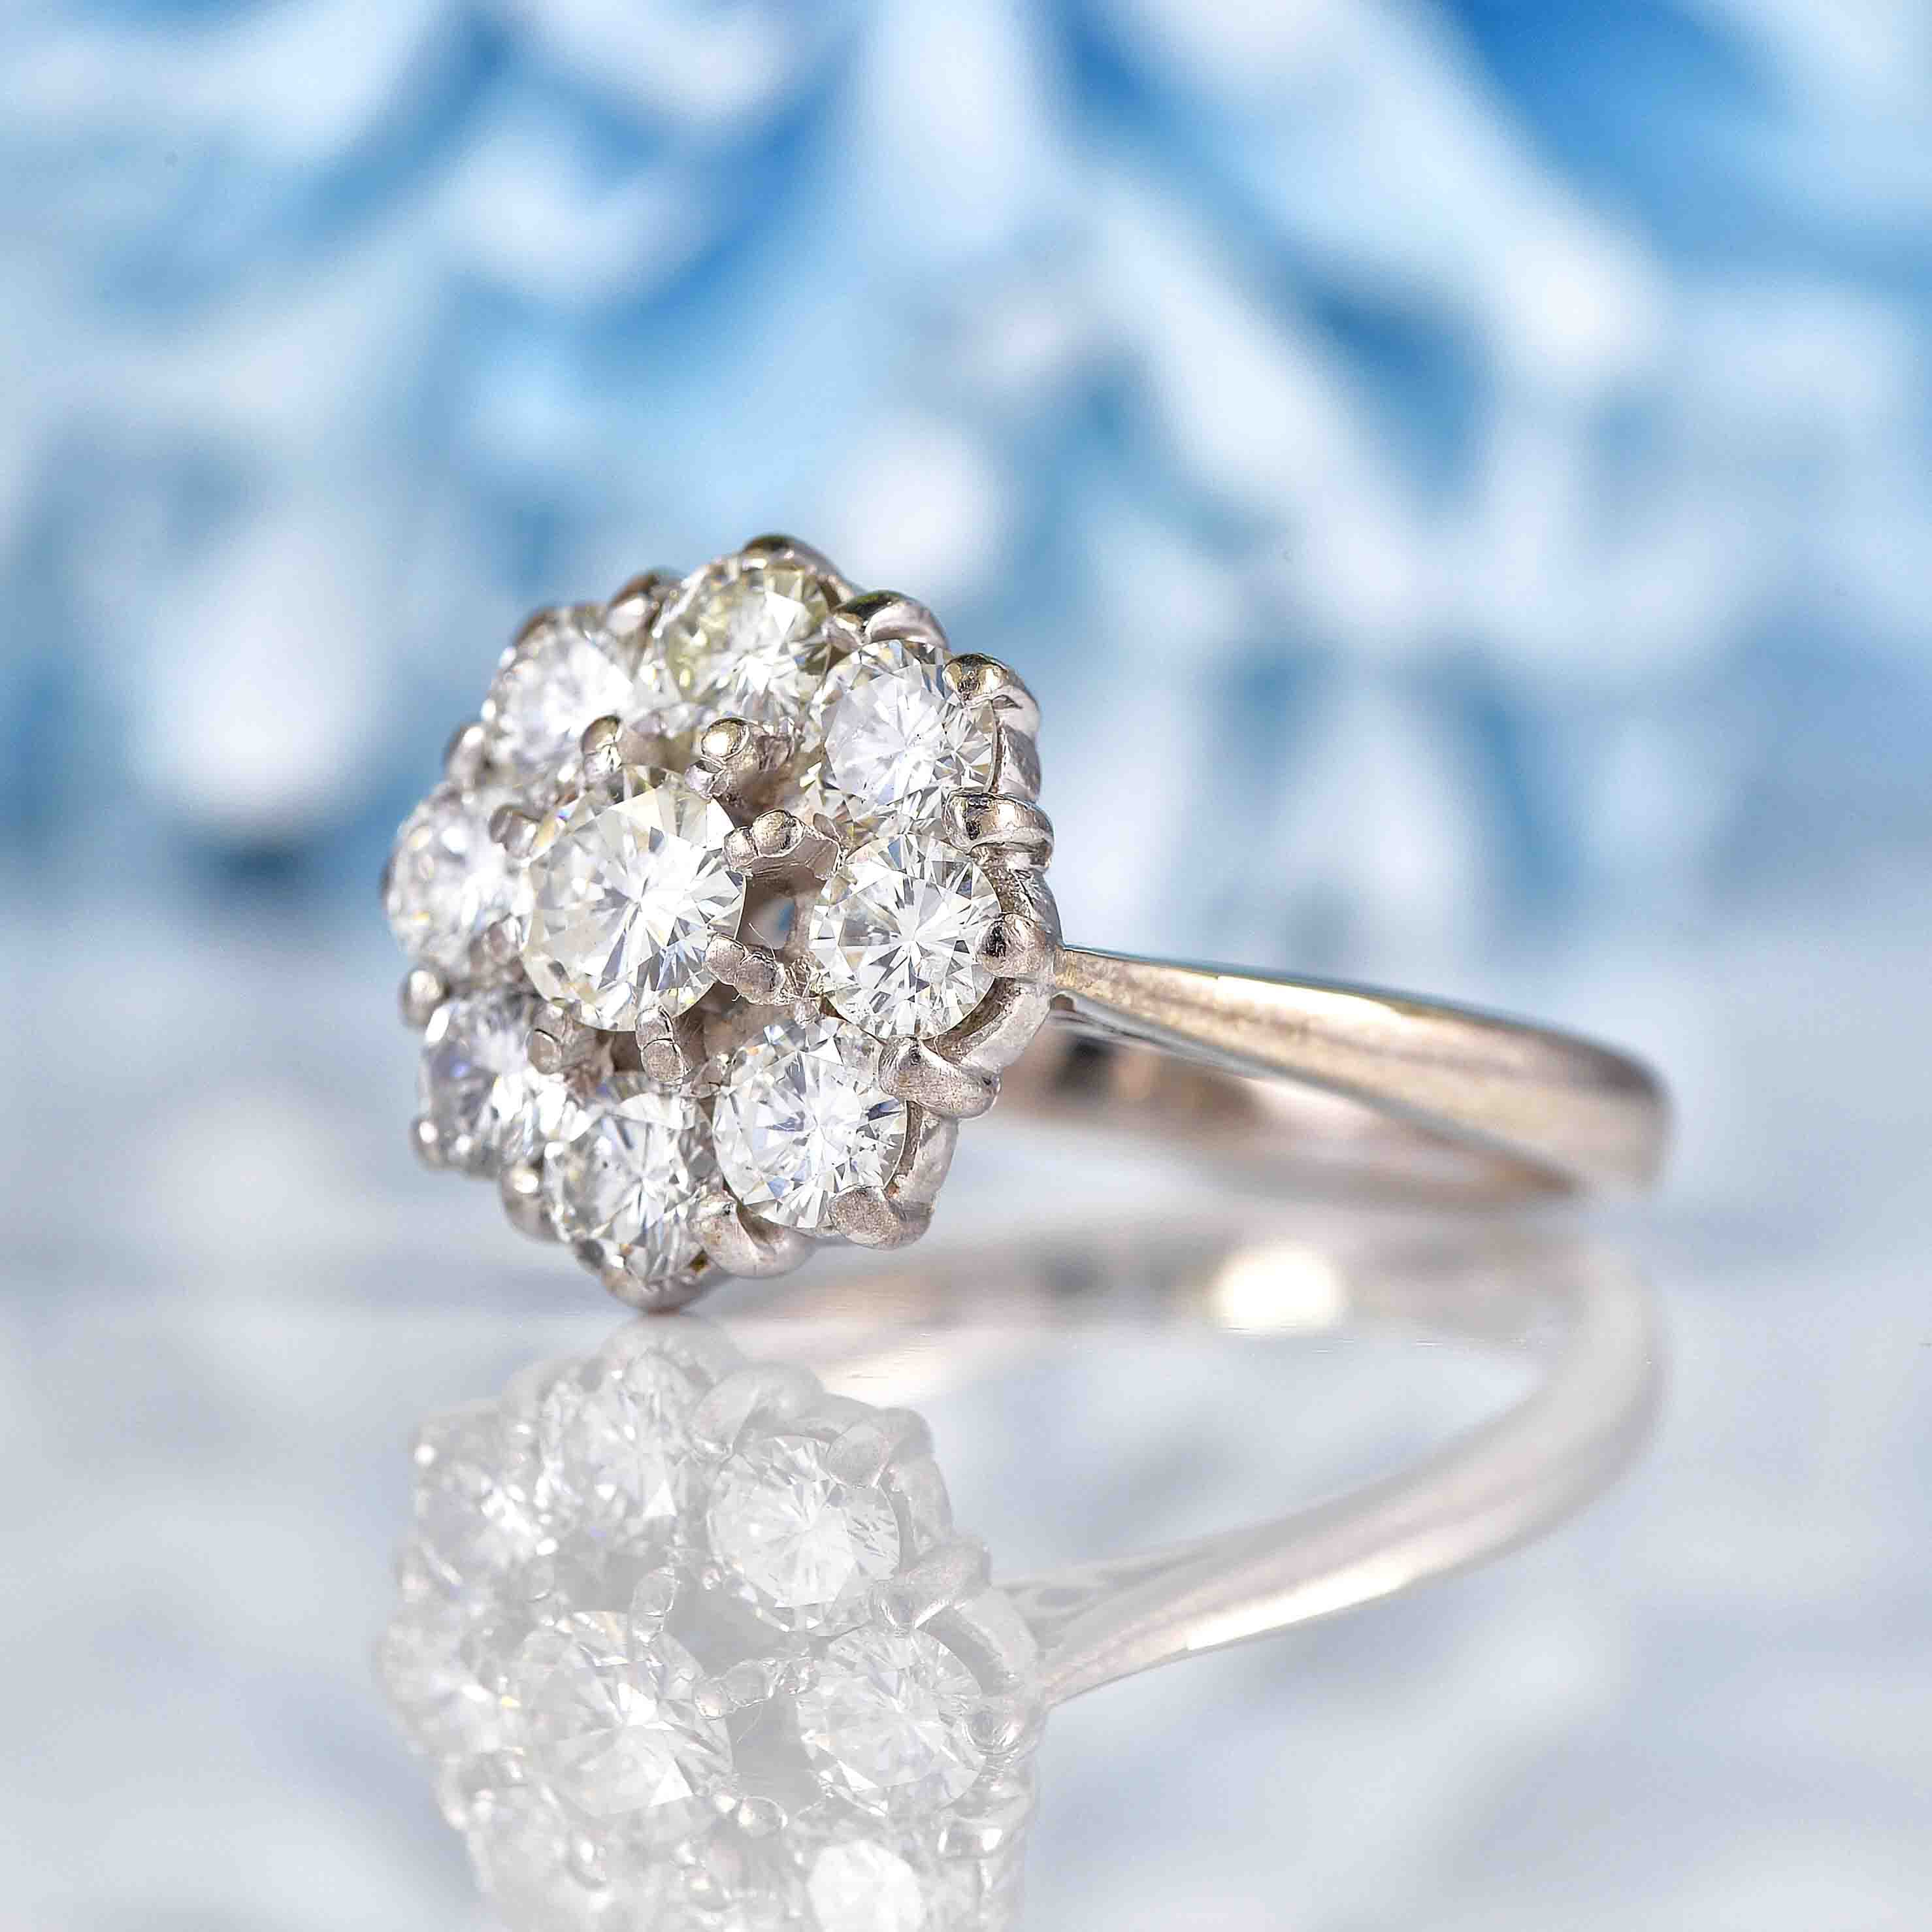 Ellibelle Jewellery Vintage Diamond 18ct White Gold Daisy Cluster Ring (1.45cts)